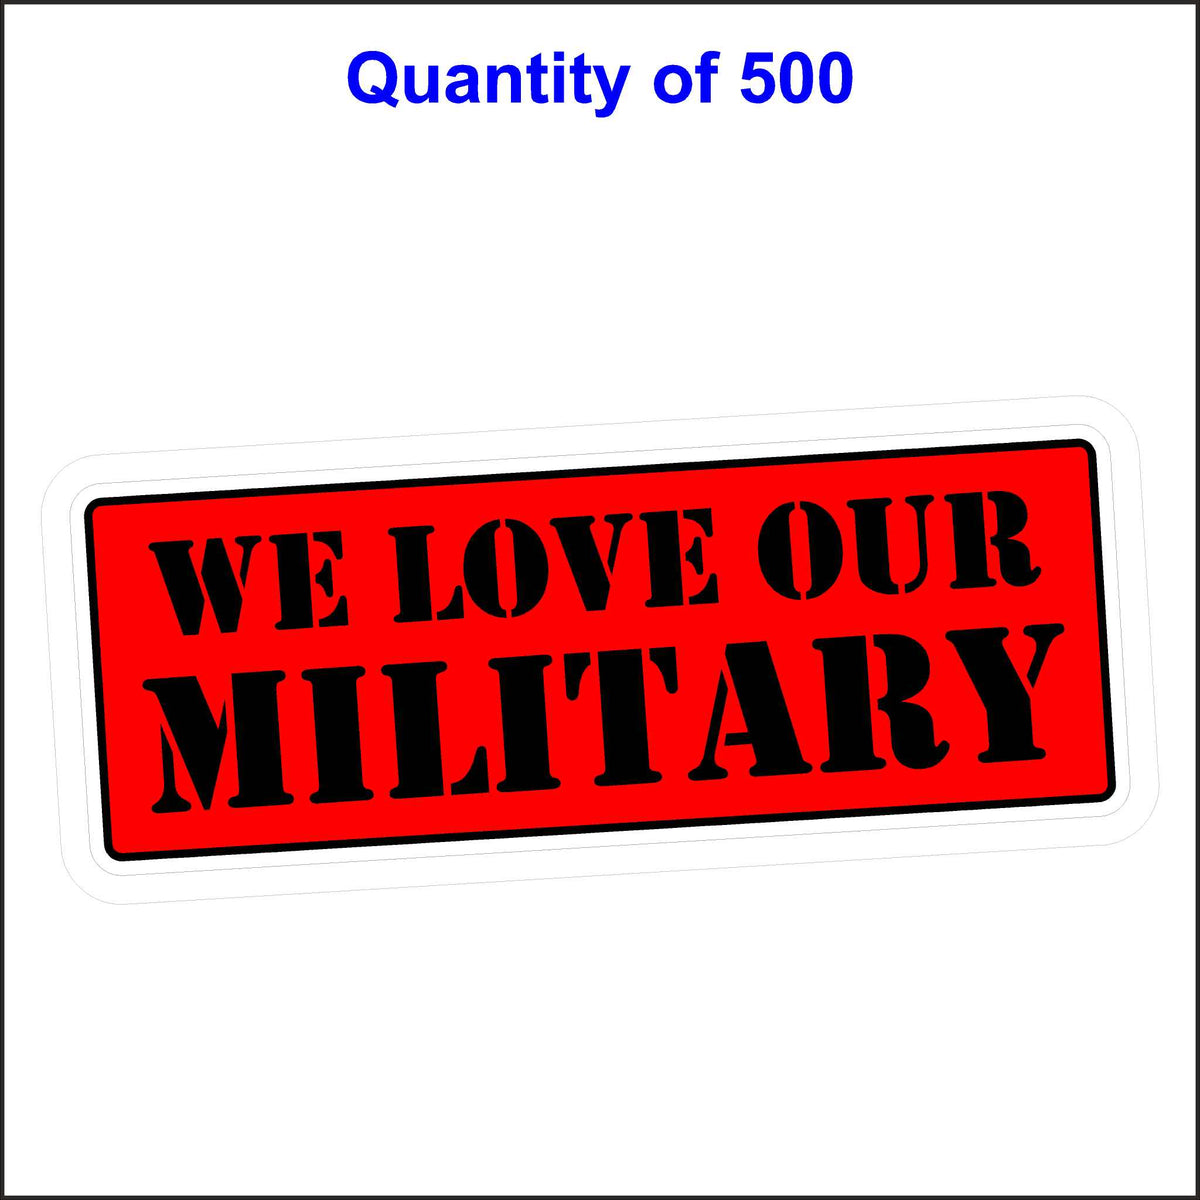 Military Stickers - We Love Our Military. 500 Quantity.